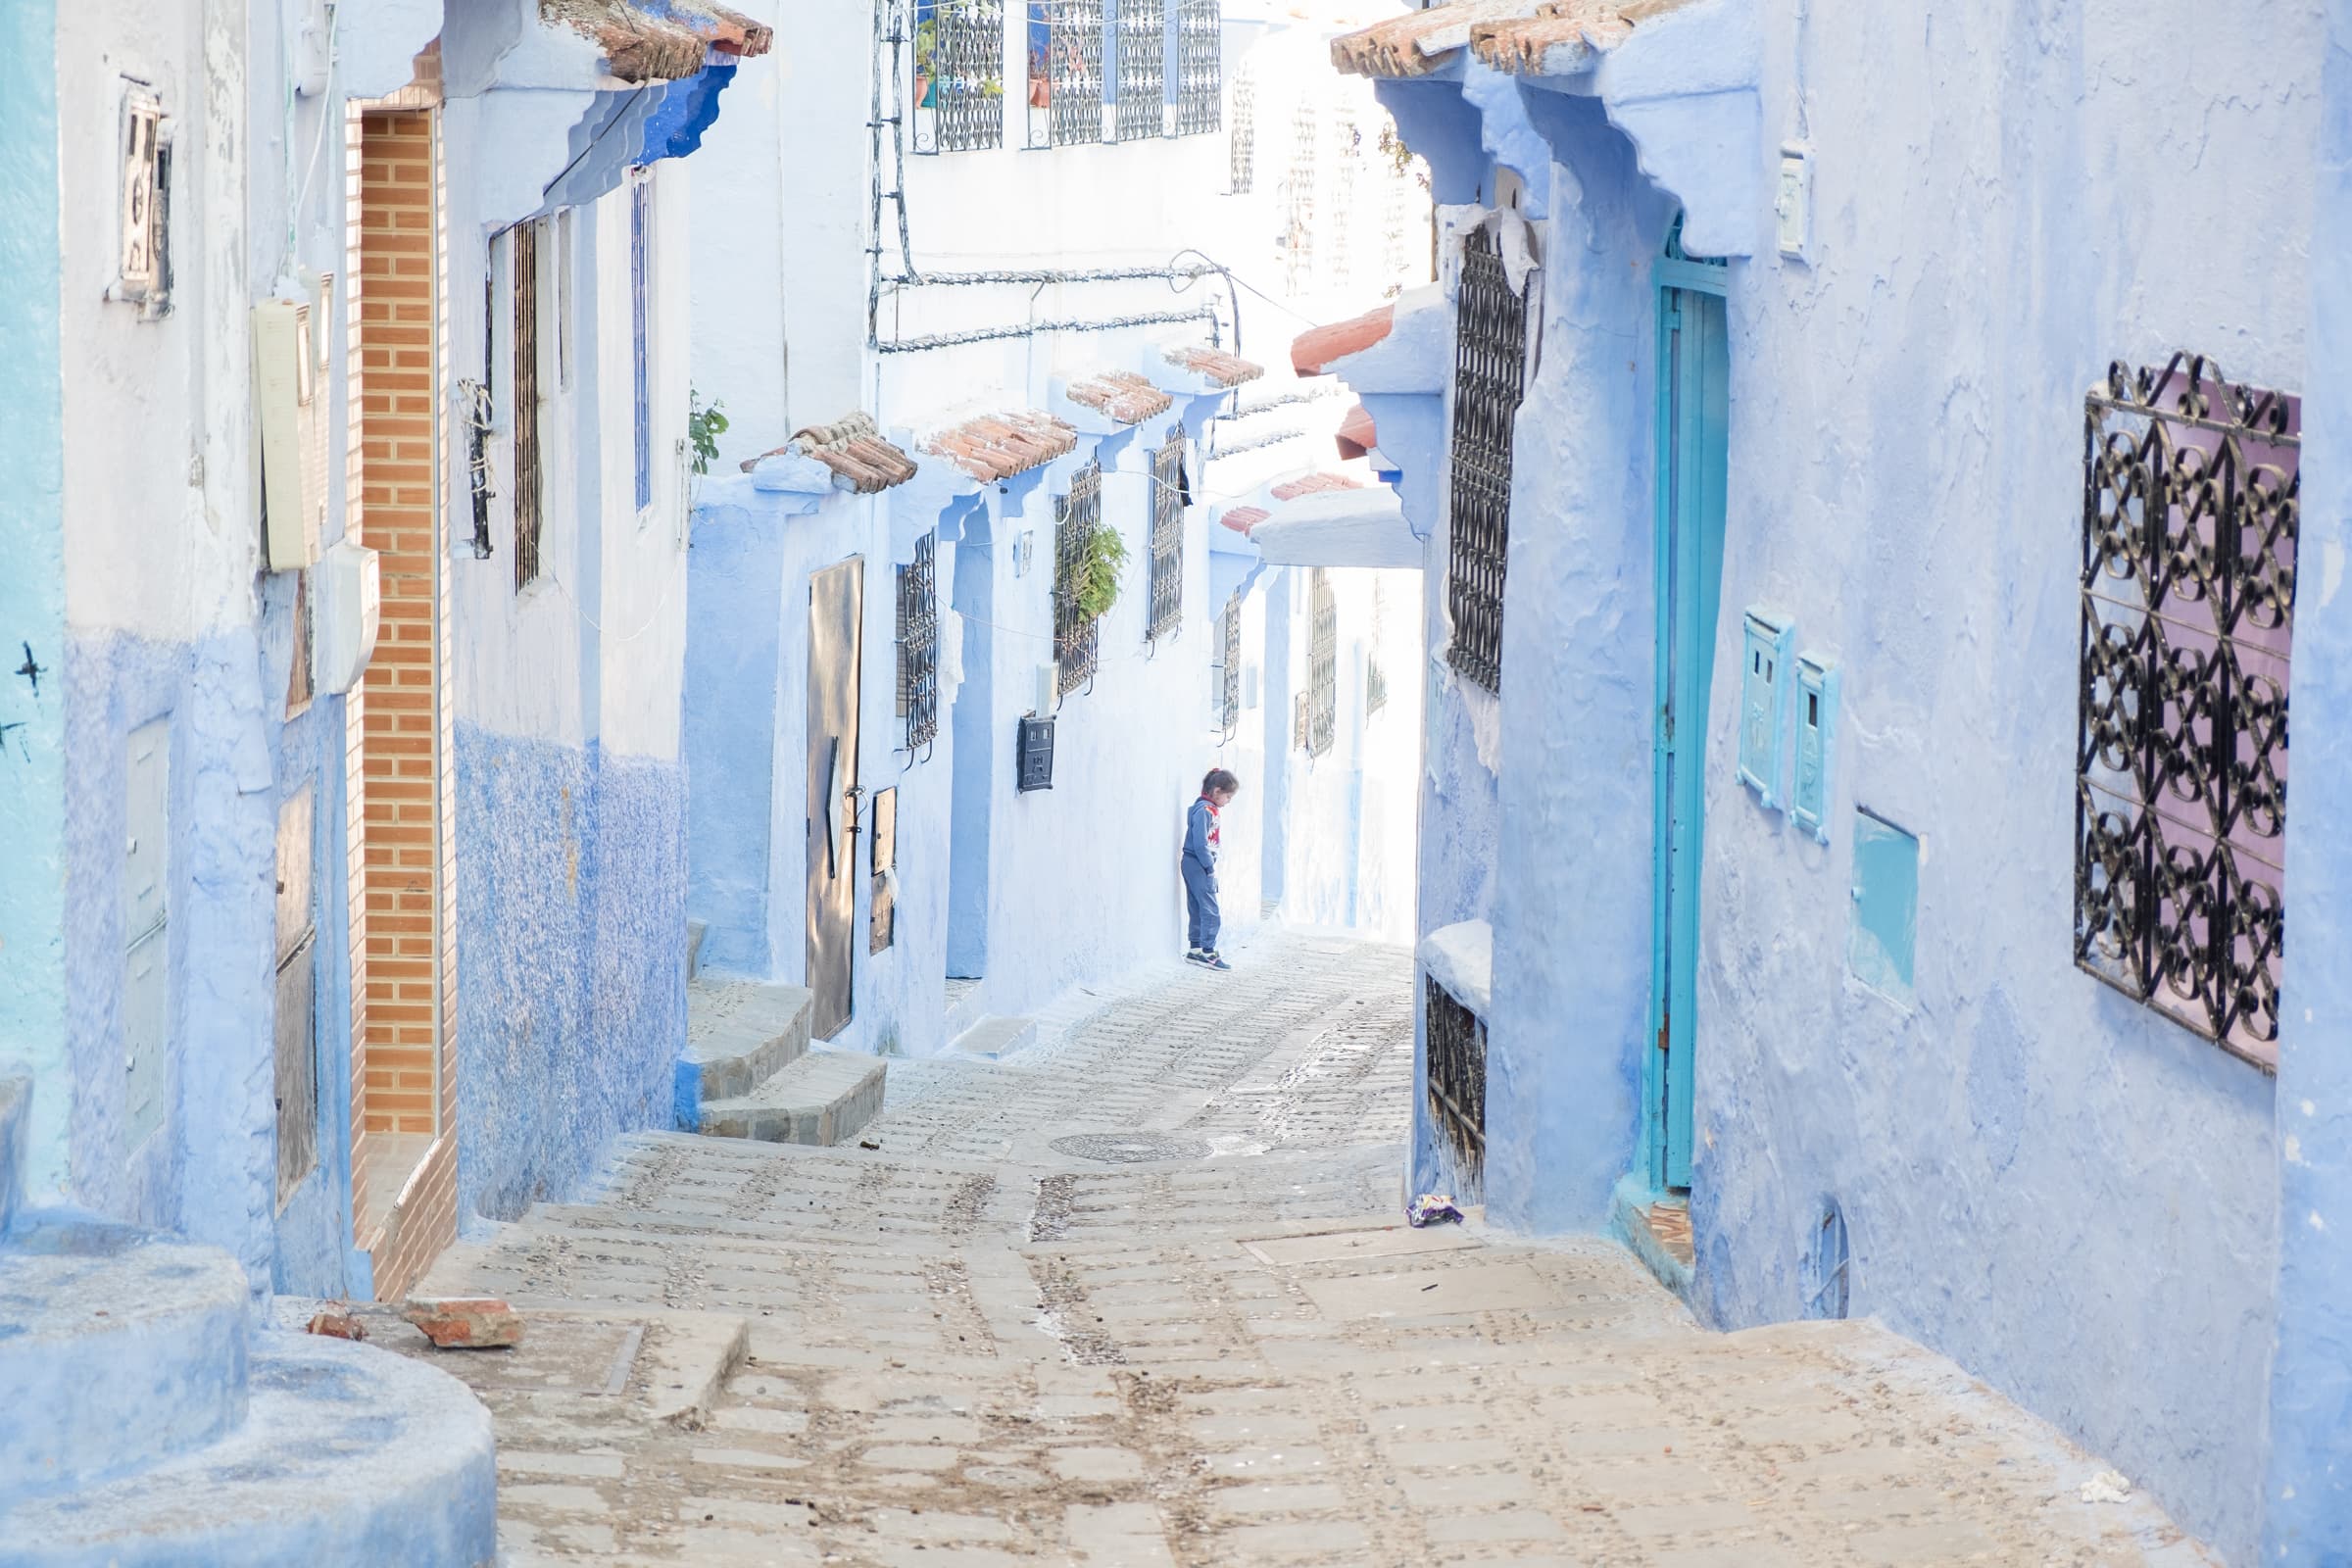 Chefchaouen: The Pearl of Morocco